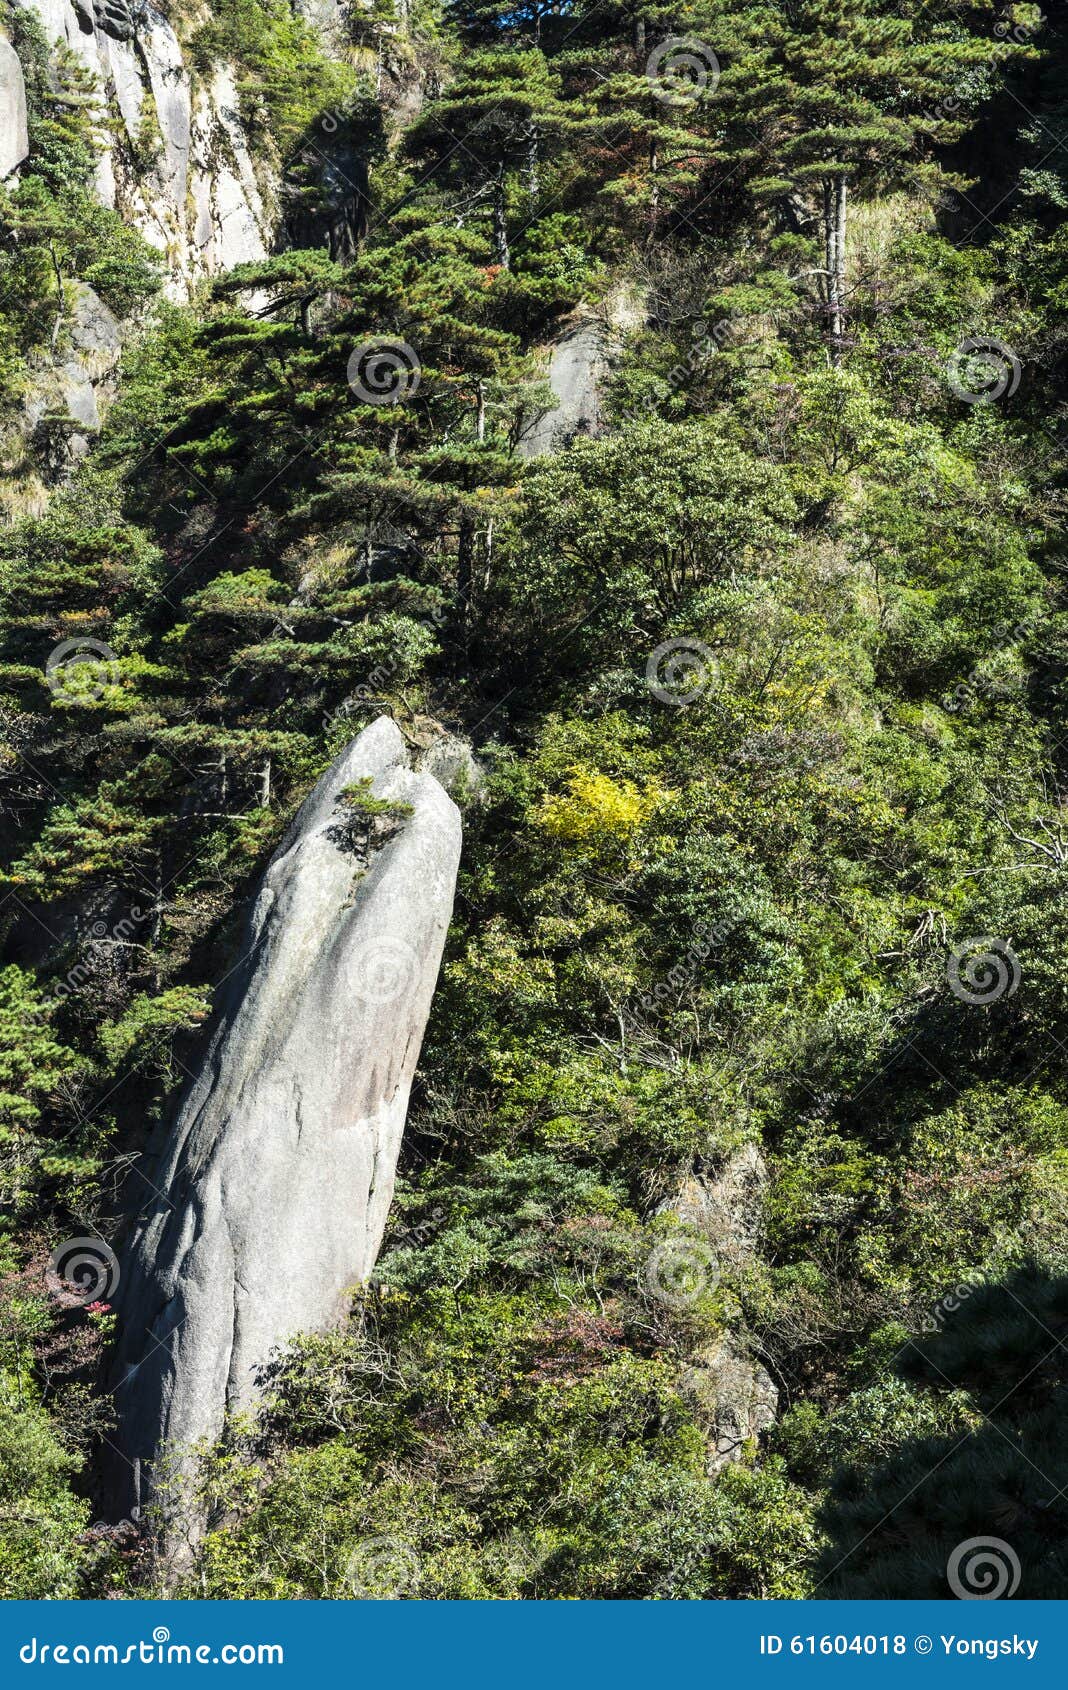 Sanqingshan Mountain Scenery Stock Photo - Image of tall, scenic: 61604018